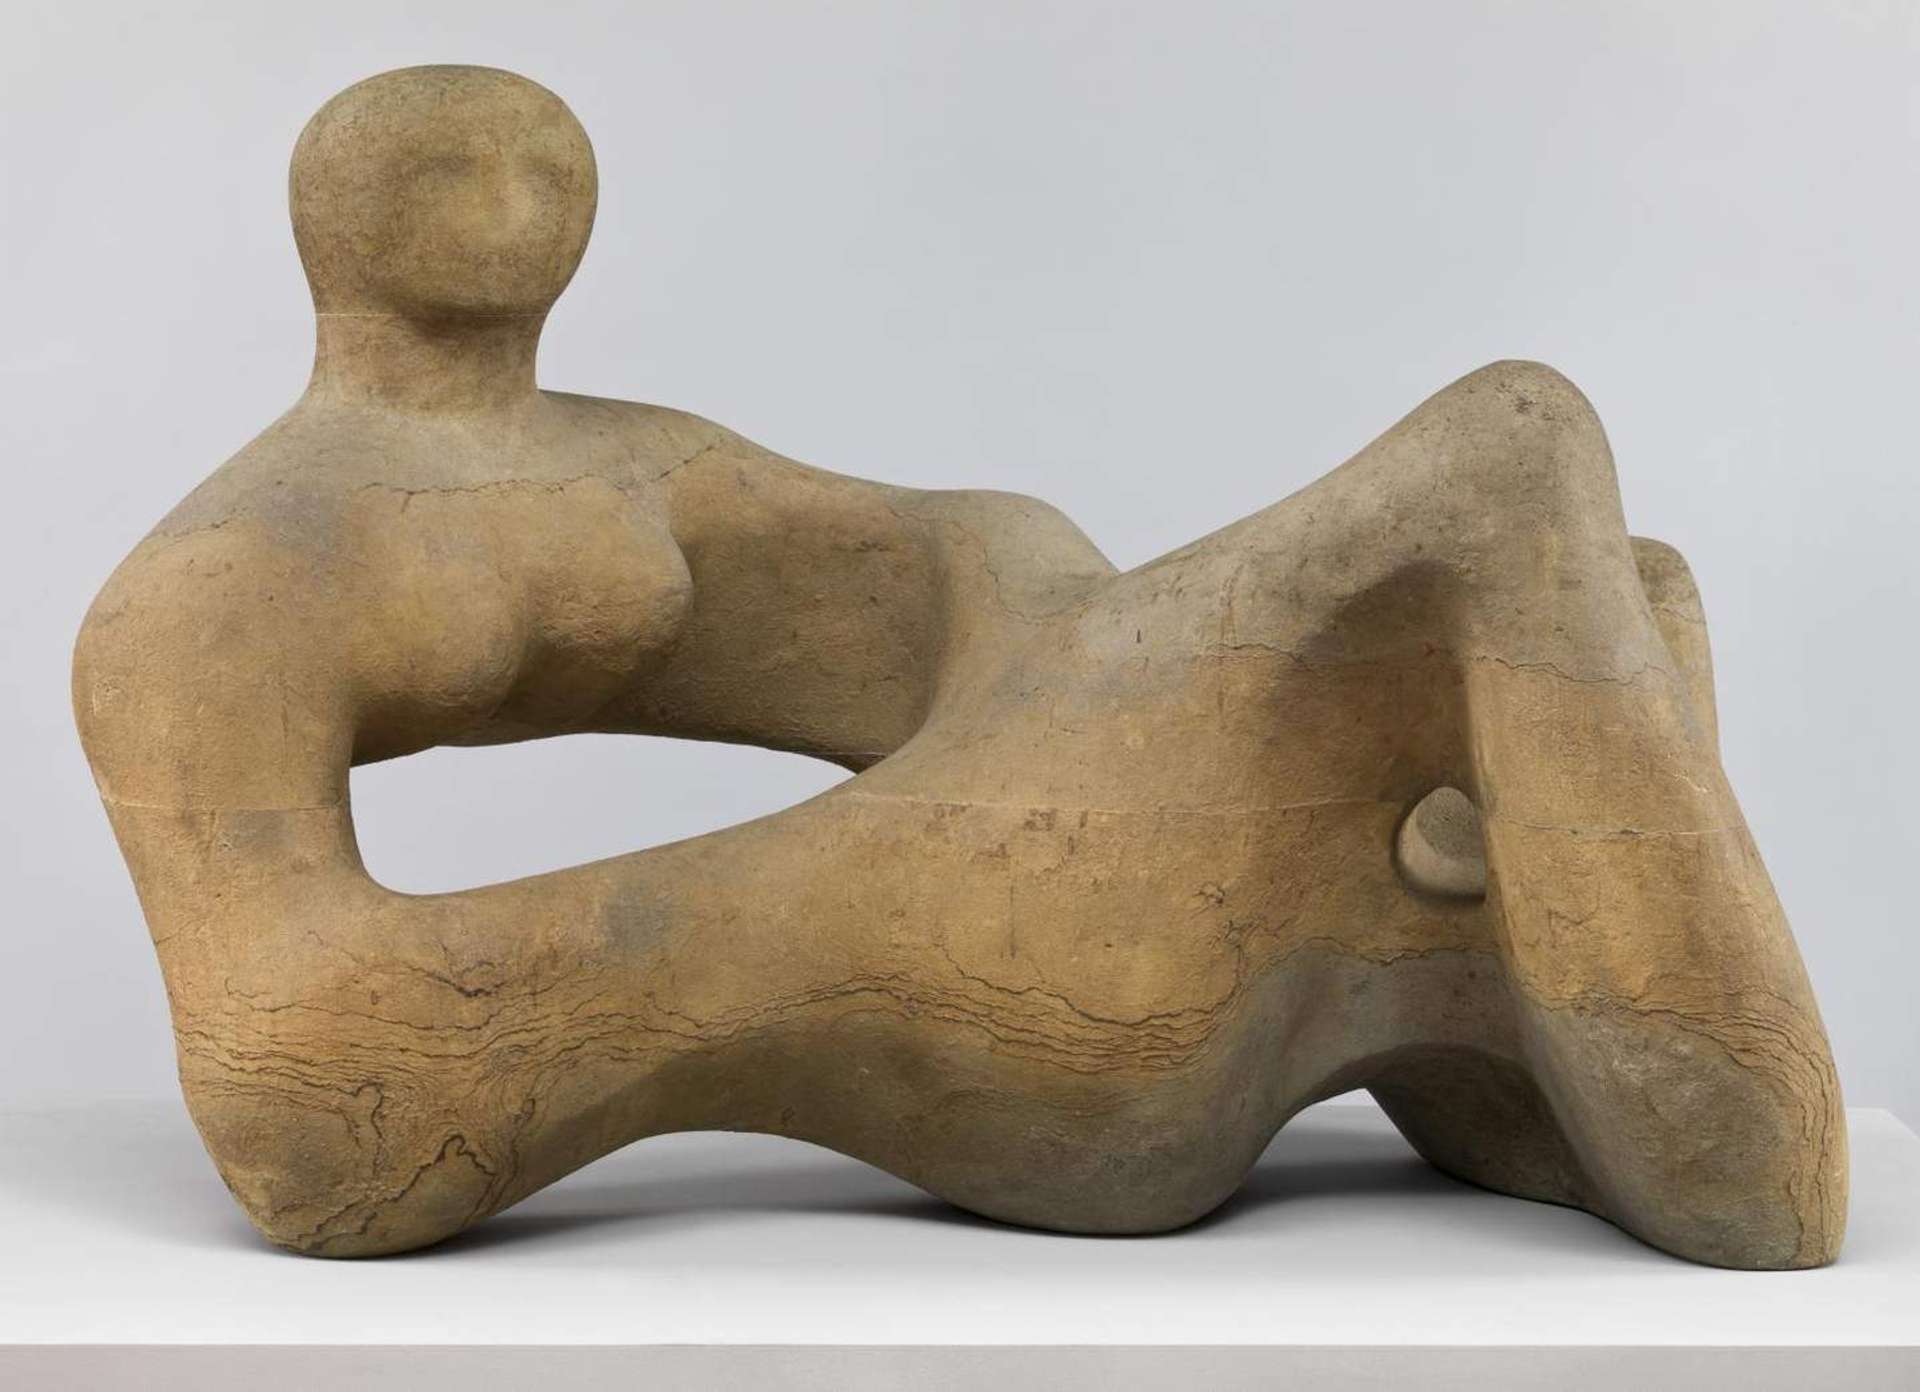 Abstract sculpture with exaggerated and distorted features. The reclining figure rests on its forearms, with a hollow hole in the centre of its chest.